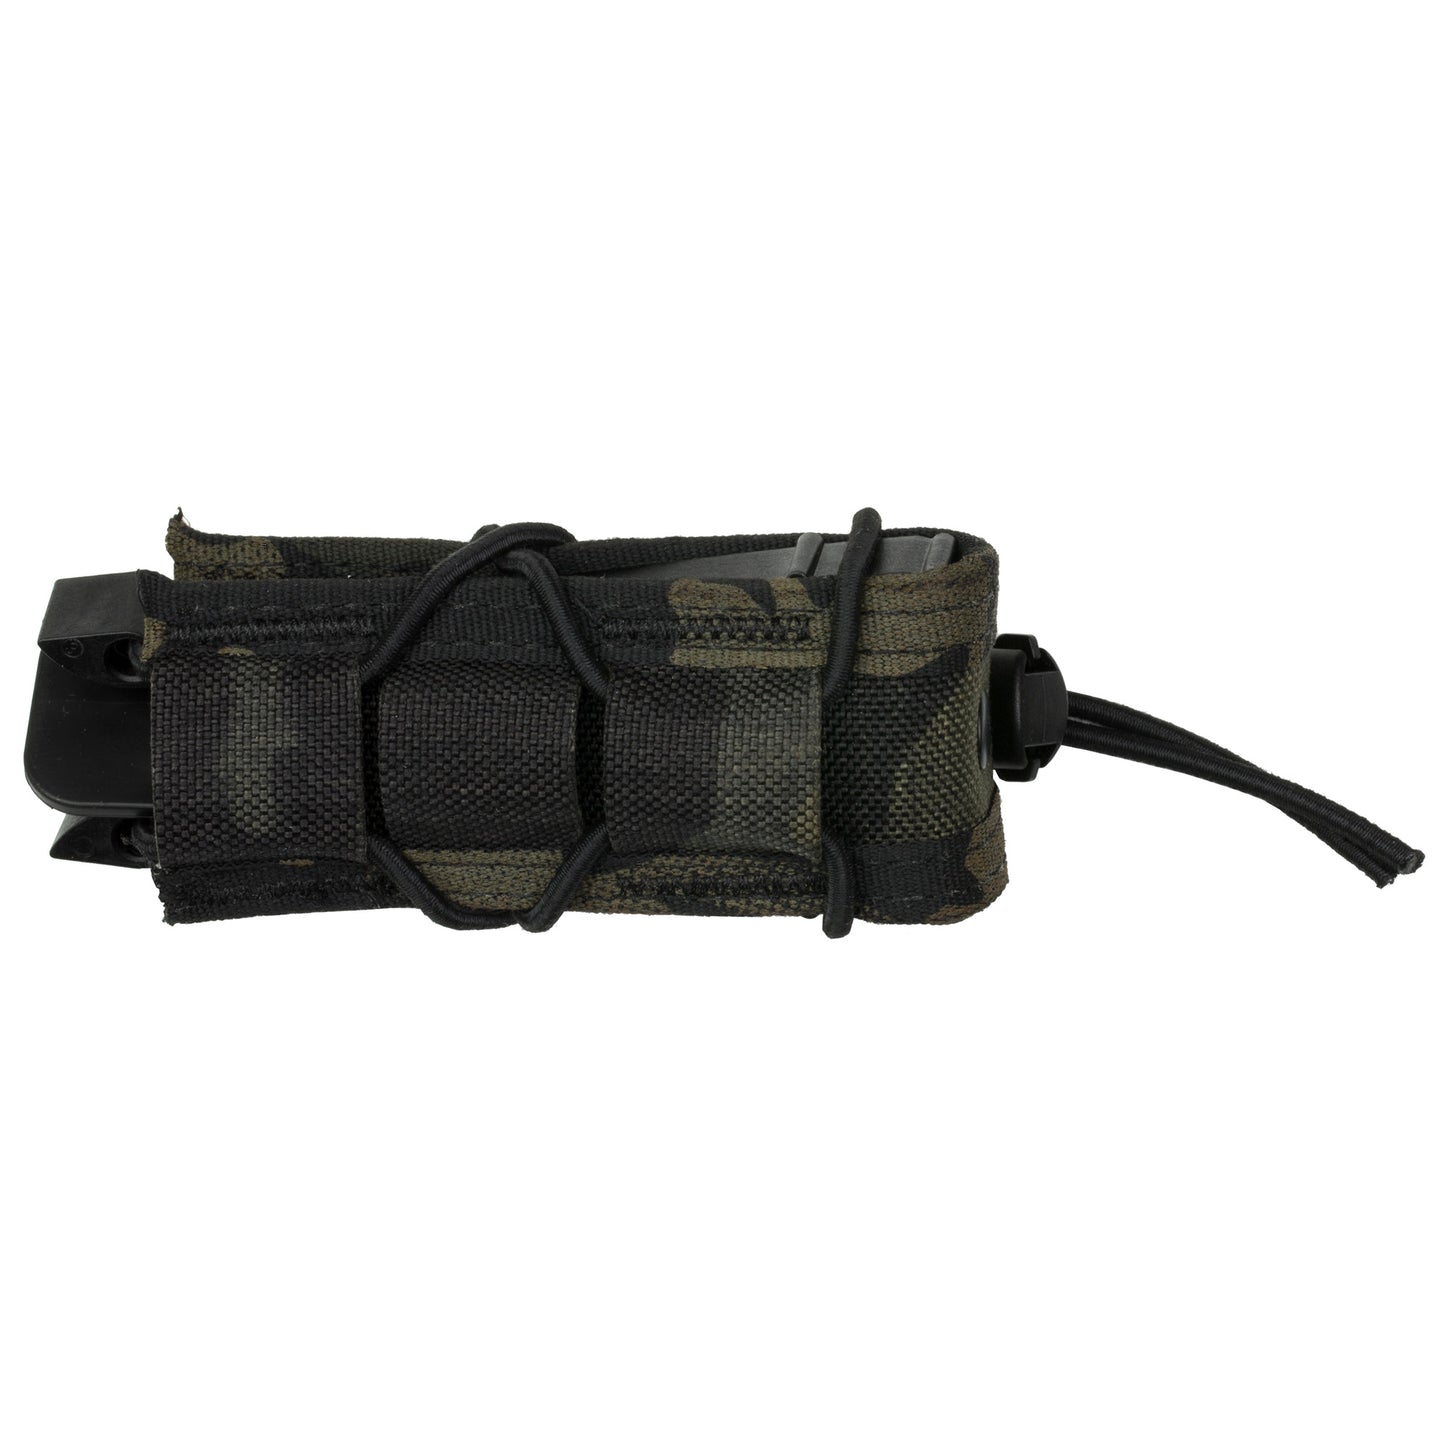 High Speed Gear, Pistol TACO, Single Magazine Pouch, Molle, Fits Most Pistol Magazines, Hybrid Kydex and Nylon, Multicam Black